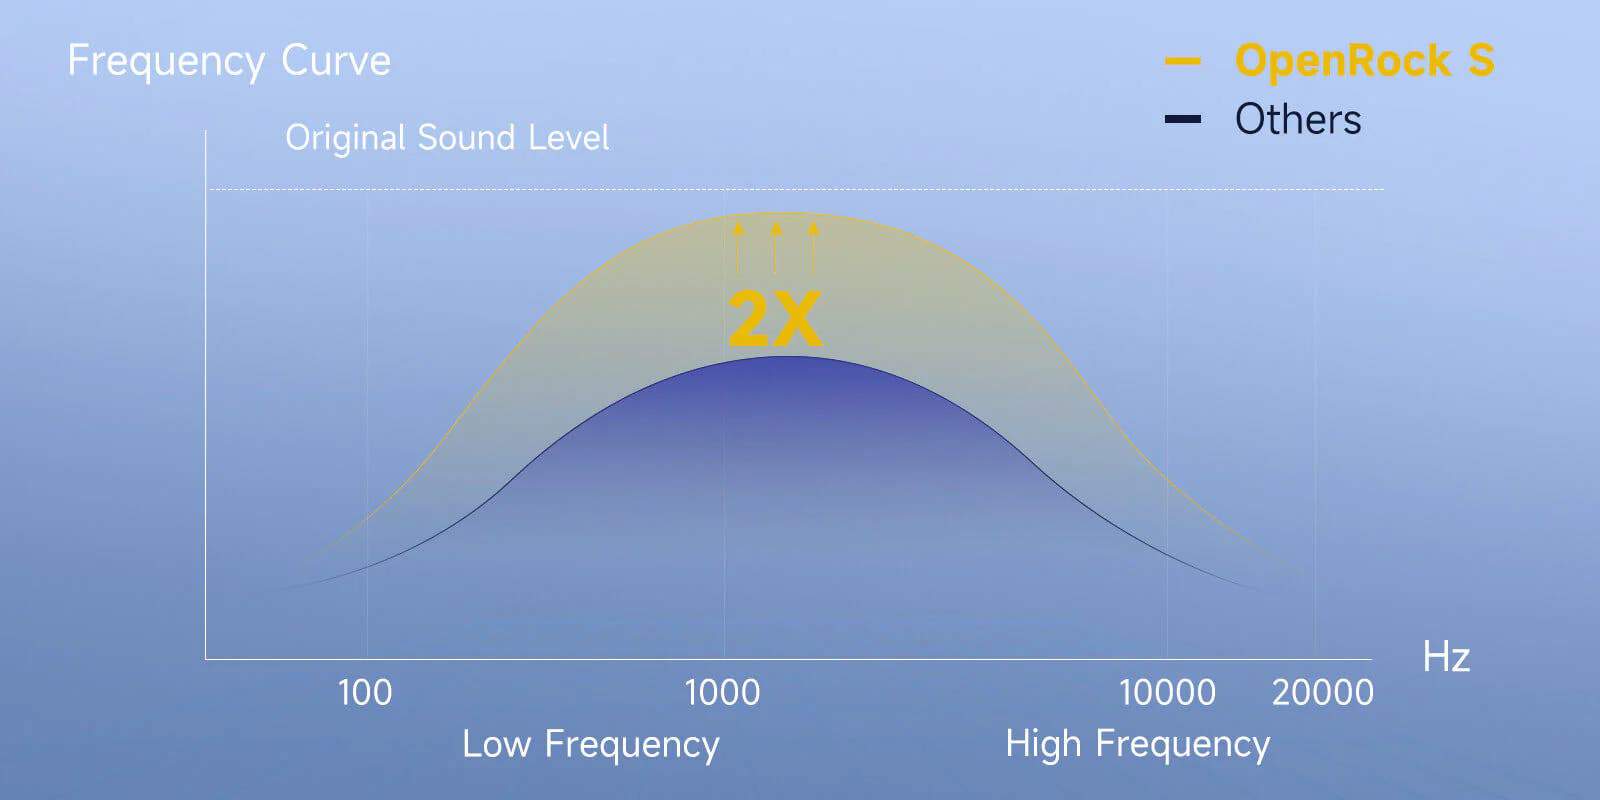 Frequency Curve of OpenRock S Open-ear Earbuds